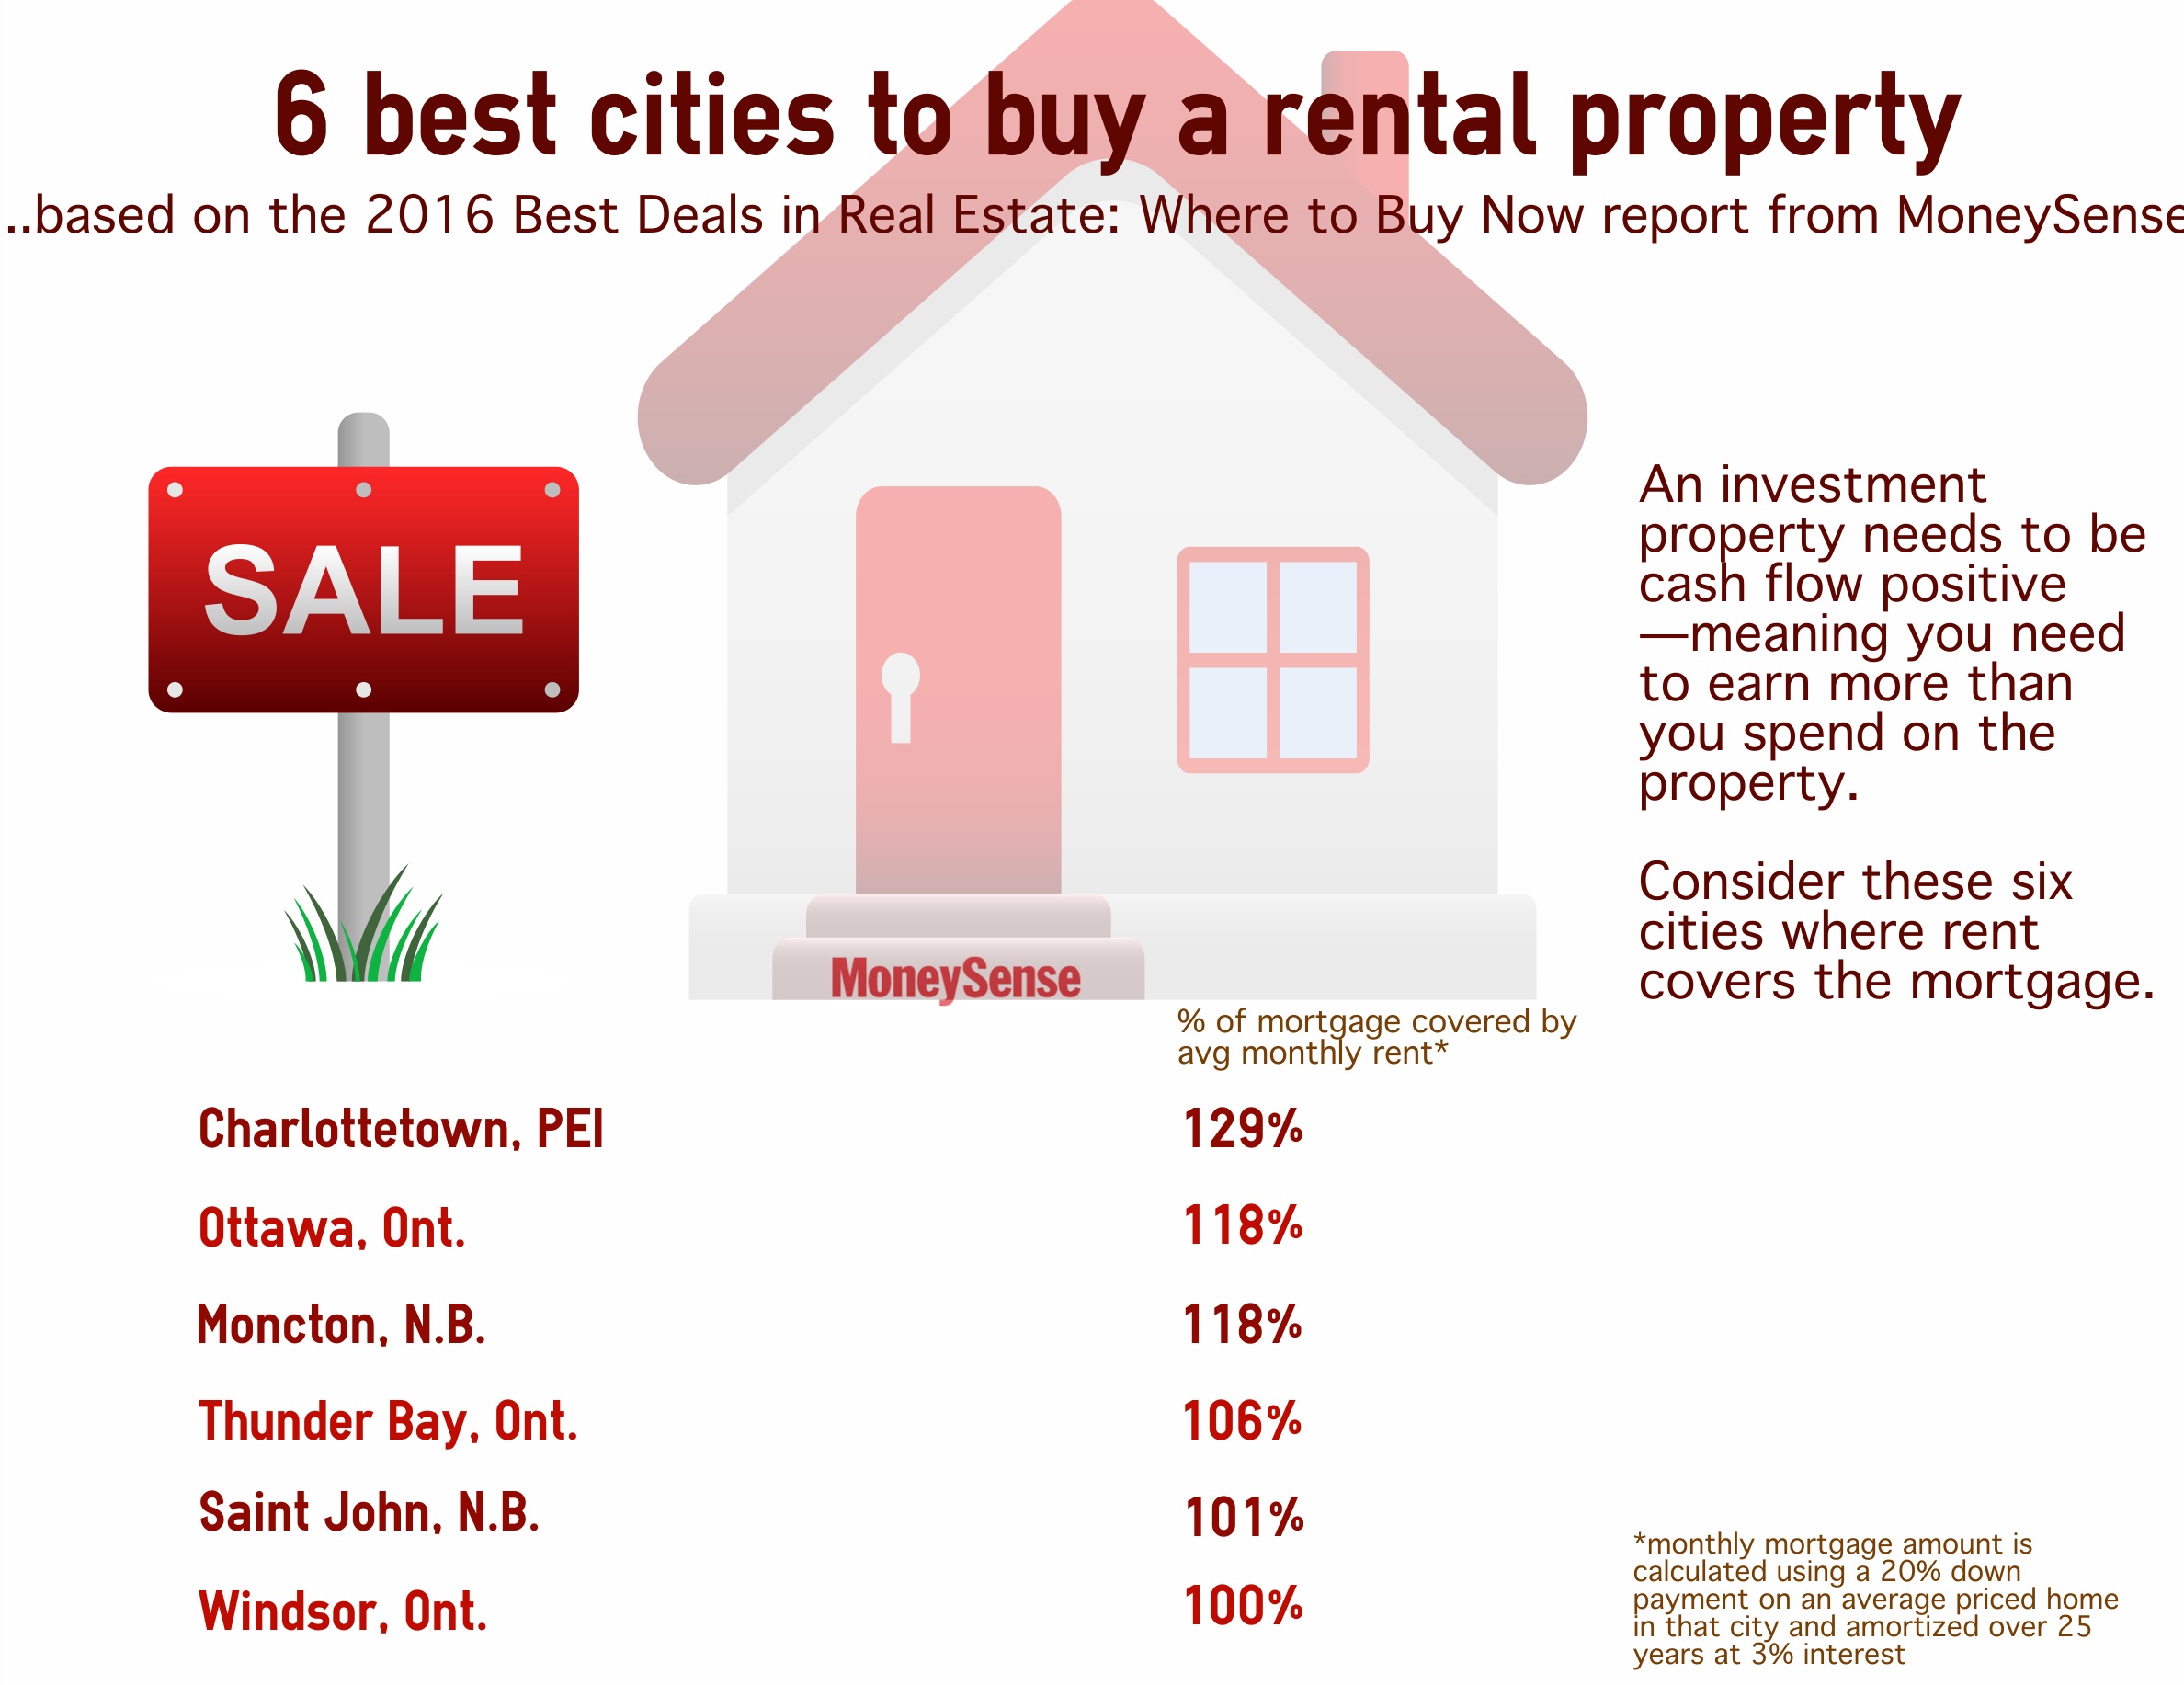 The 6 best cities to buy a rental property